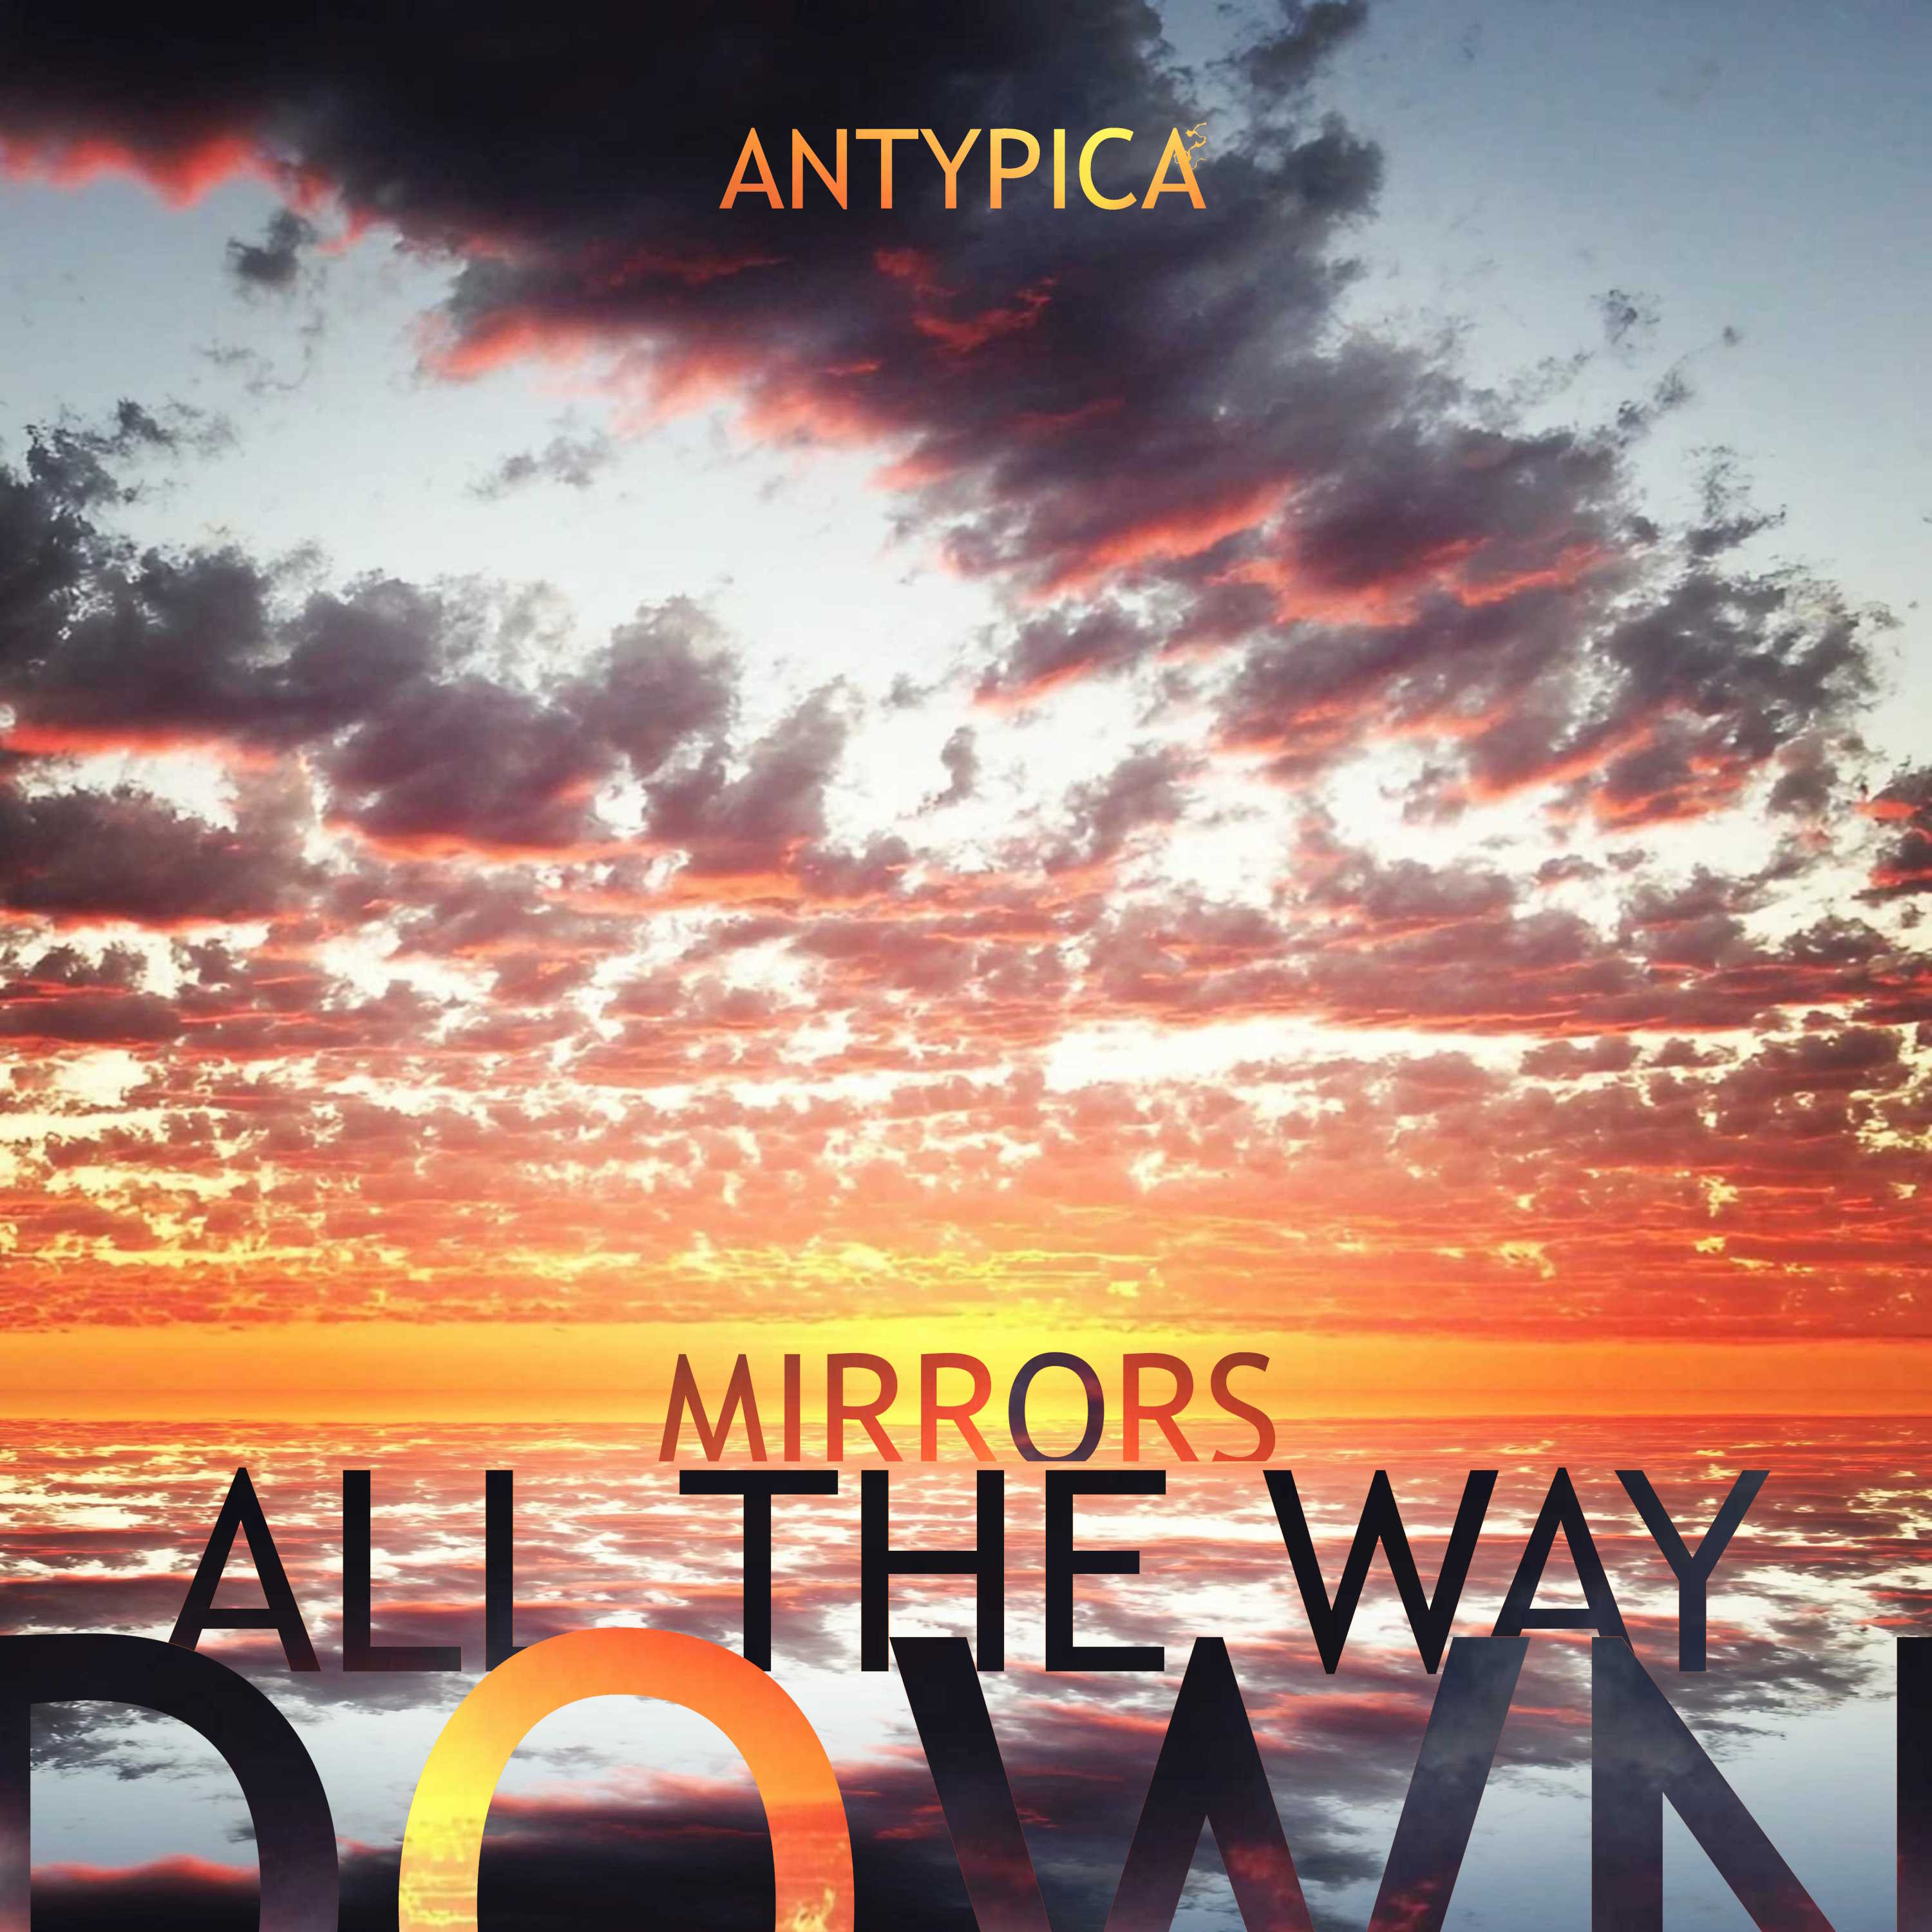 Antypica - Mirrors All The Way Down